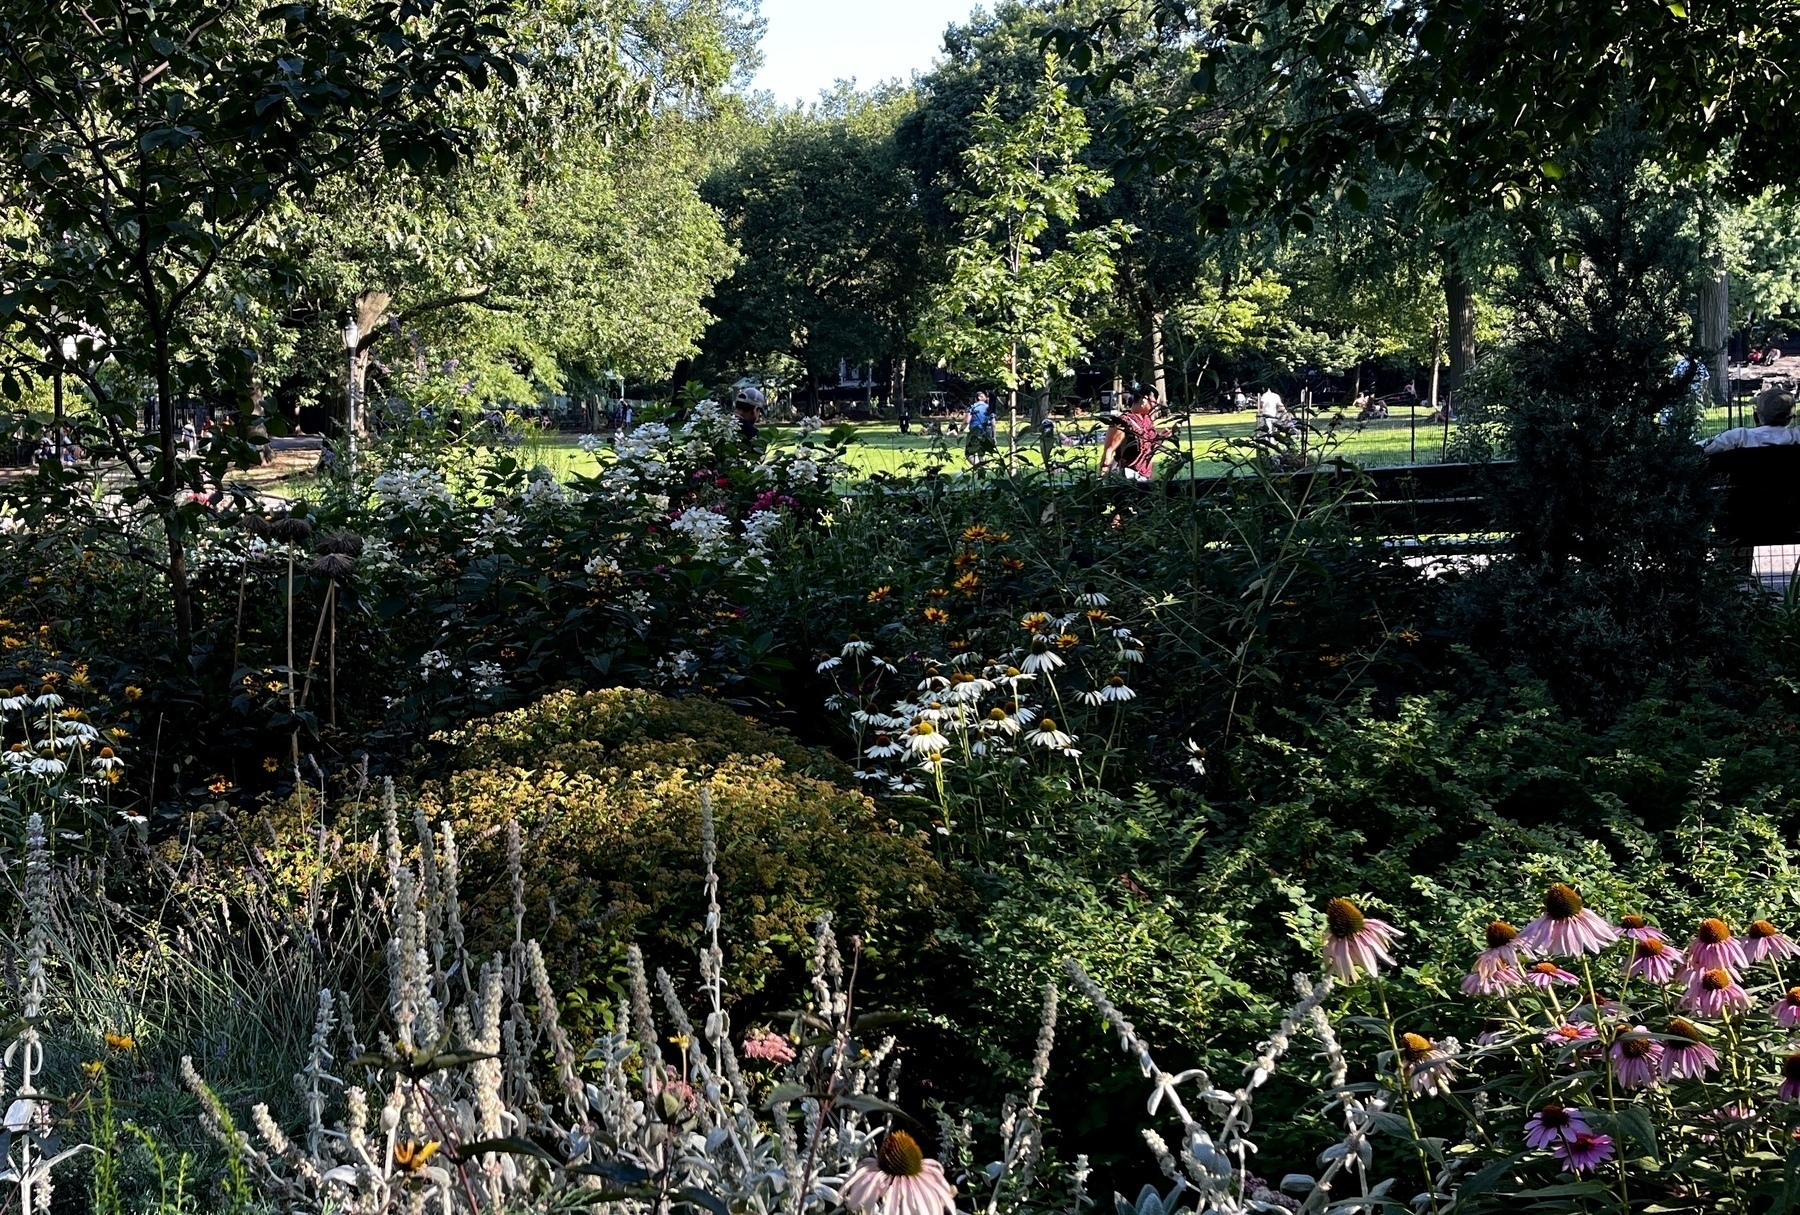 A picture of a park. People walking up and down a path, flowers in the foreground and different colors, green grass in the background with some trees. &10;